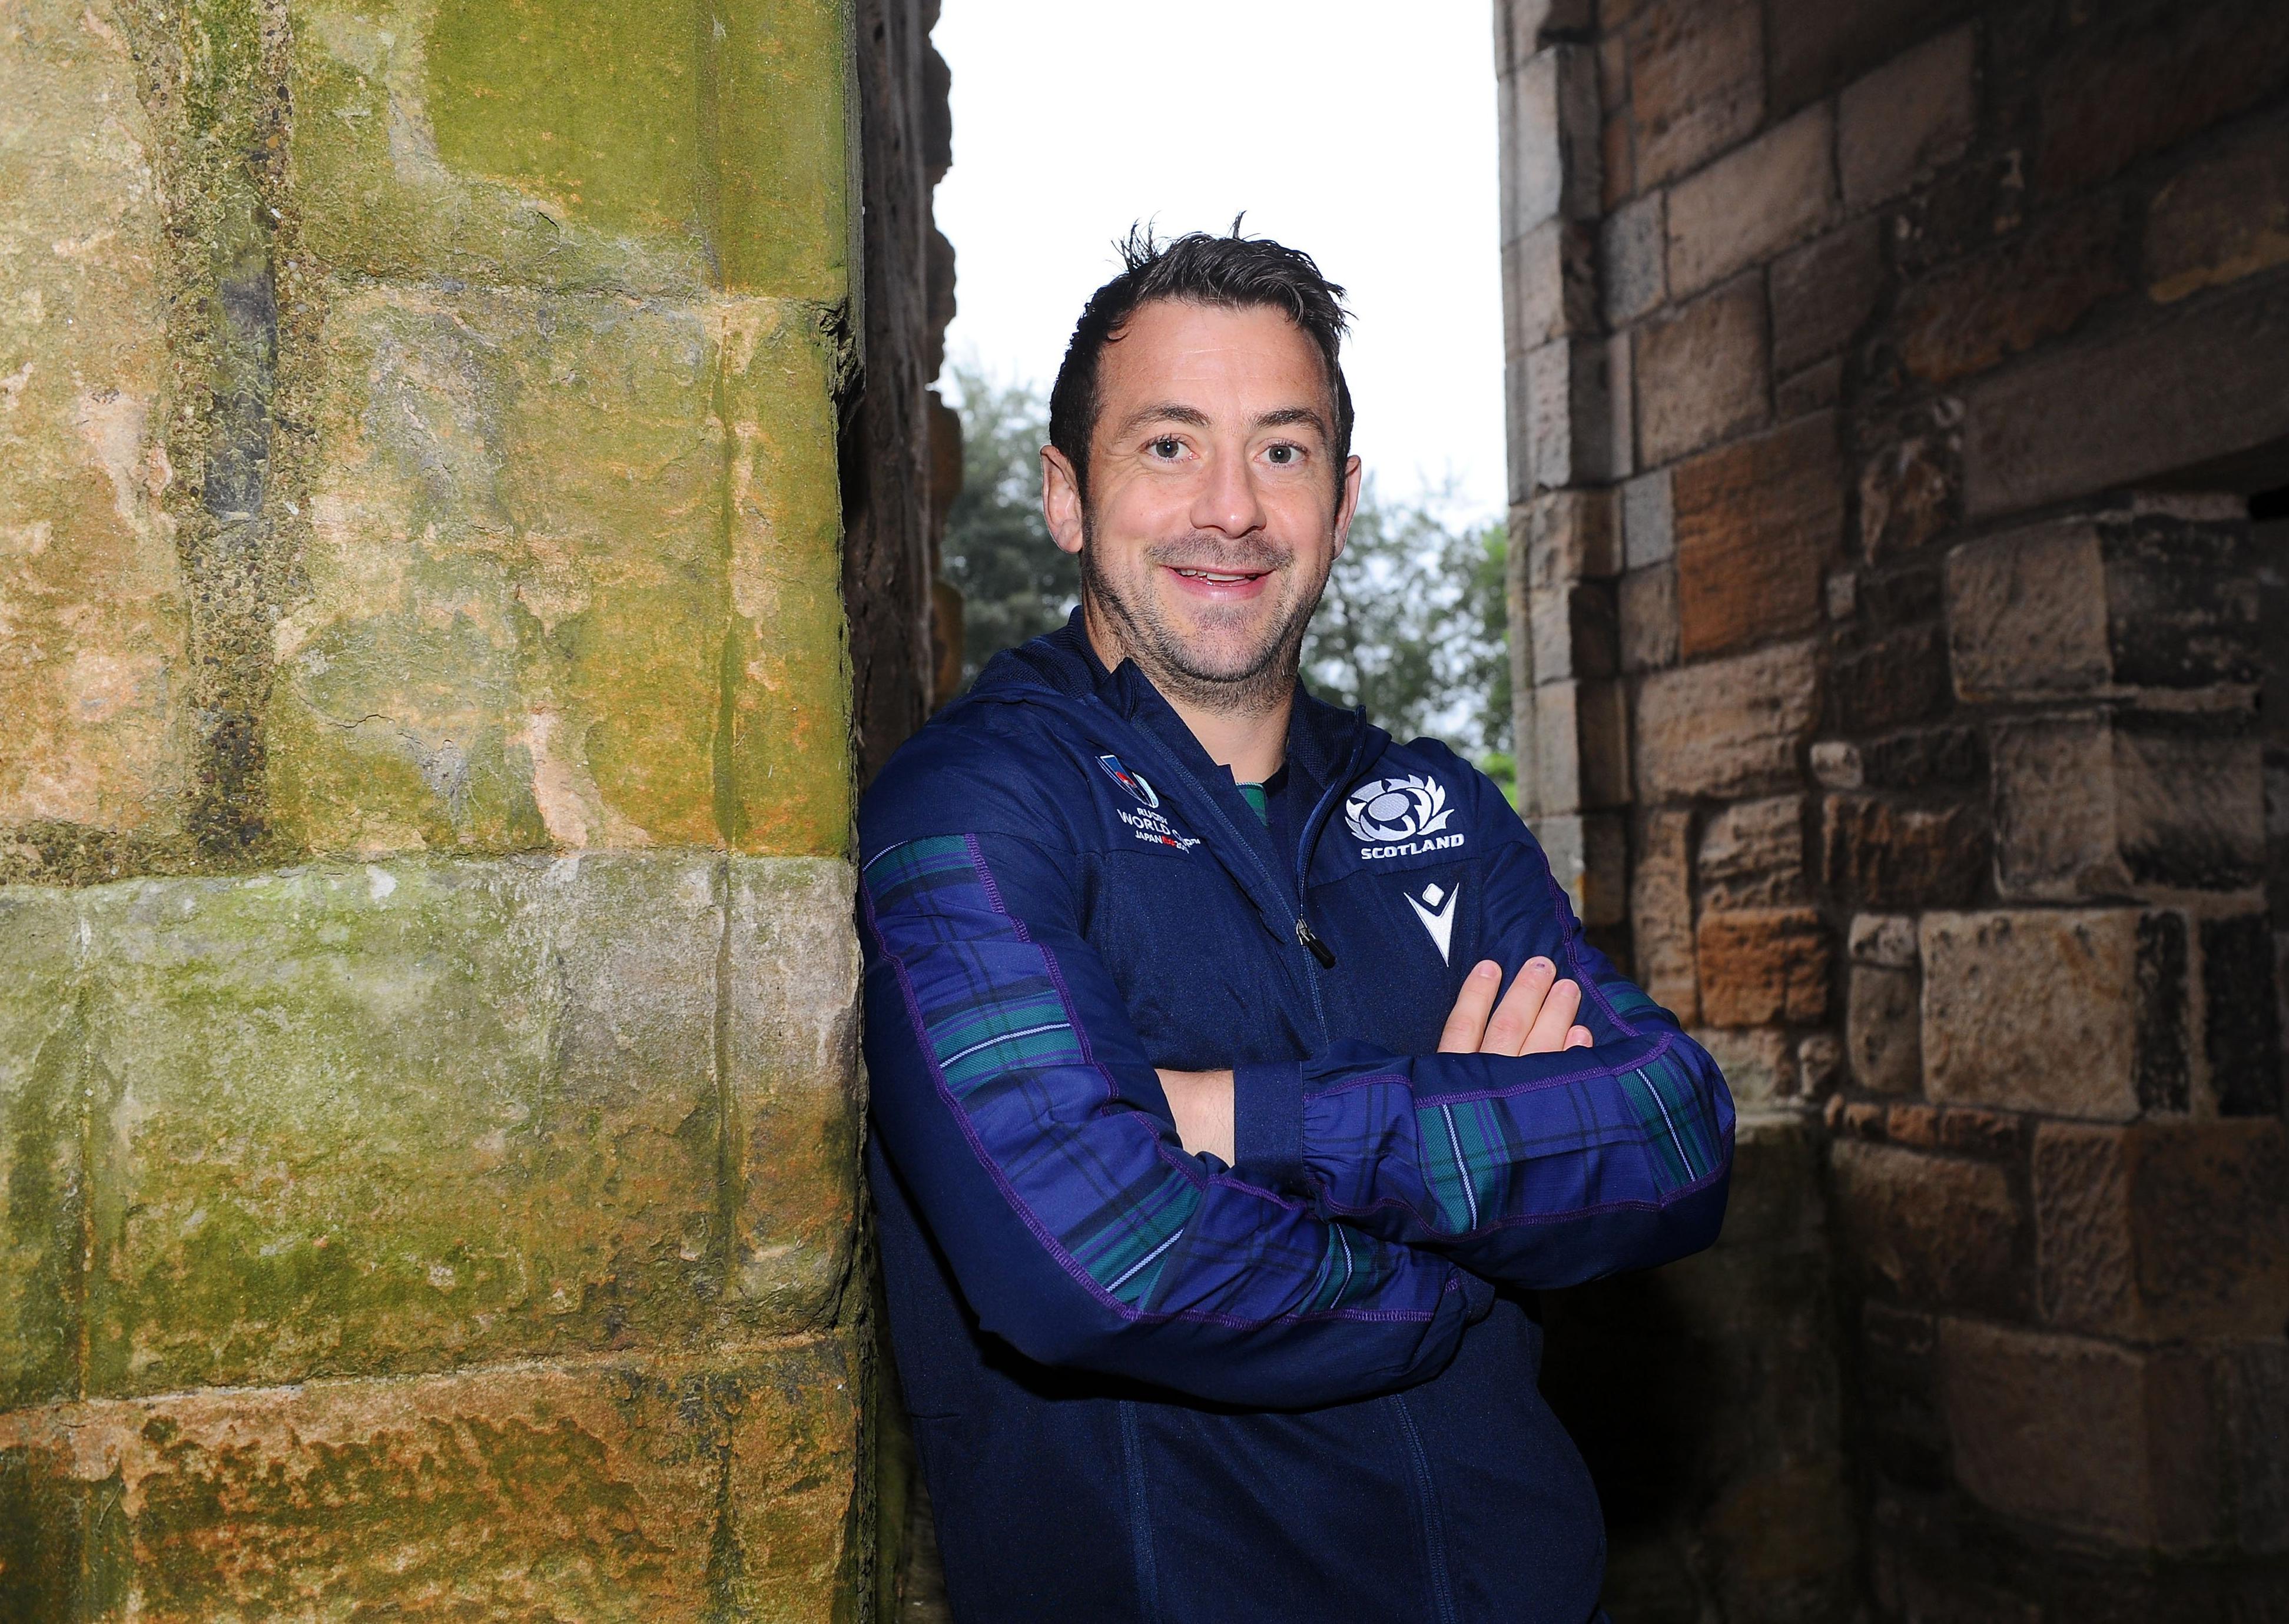 Greig Laidlaw at Linlithgow Palace after being named in the Scotland Rugby Union World Cup squad for Japan 2019.